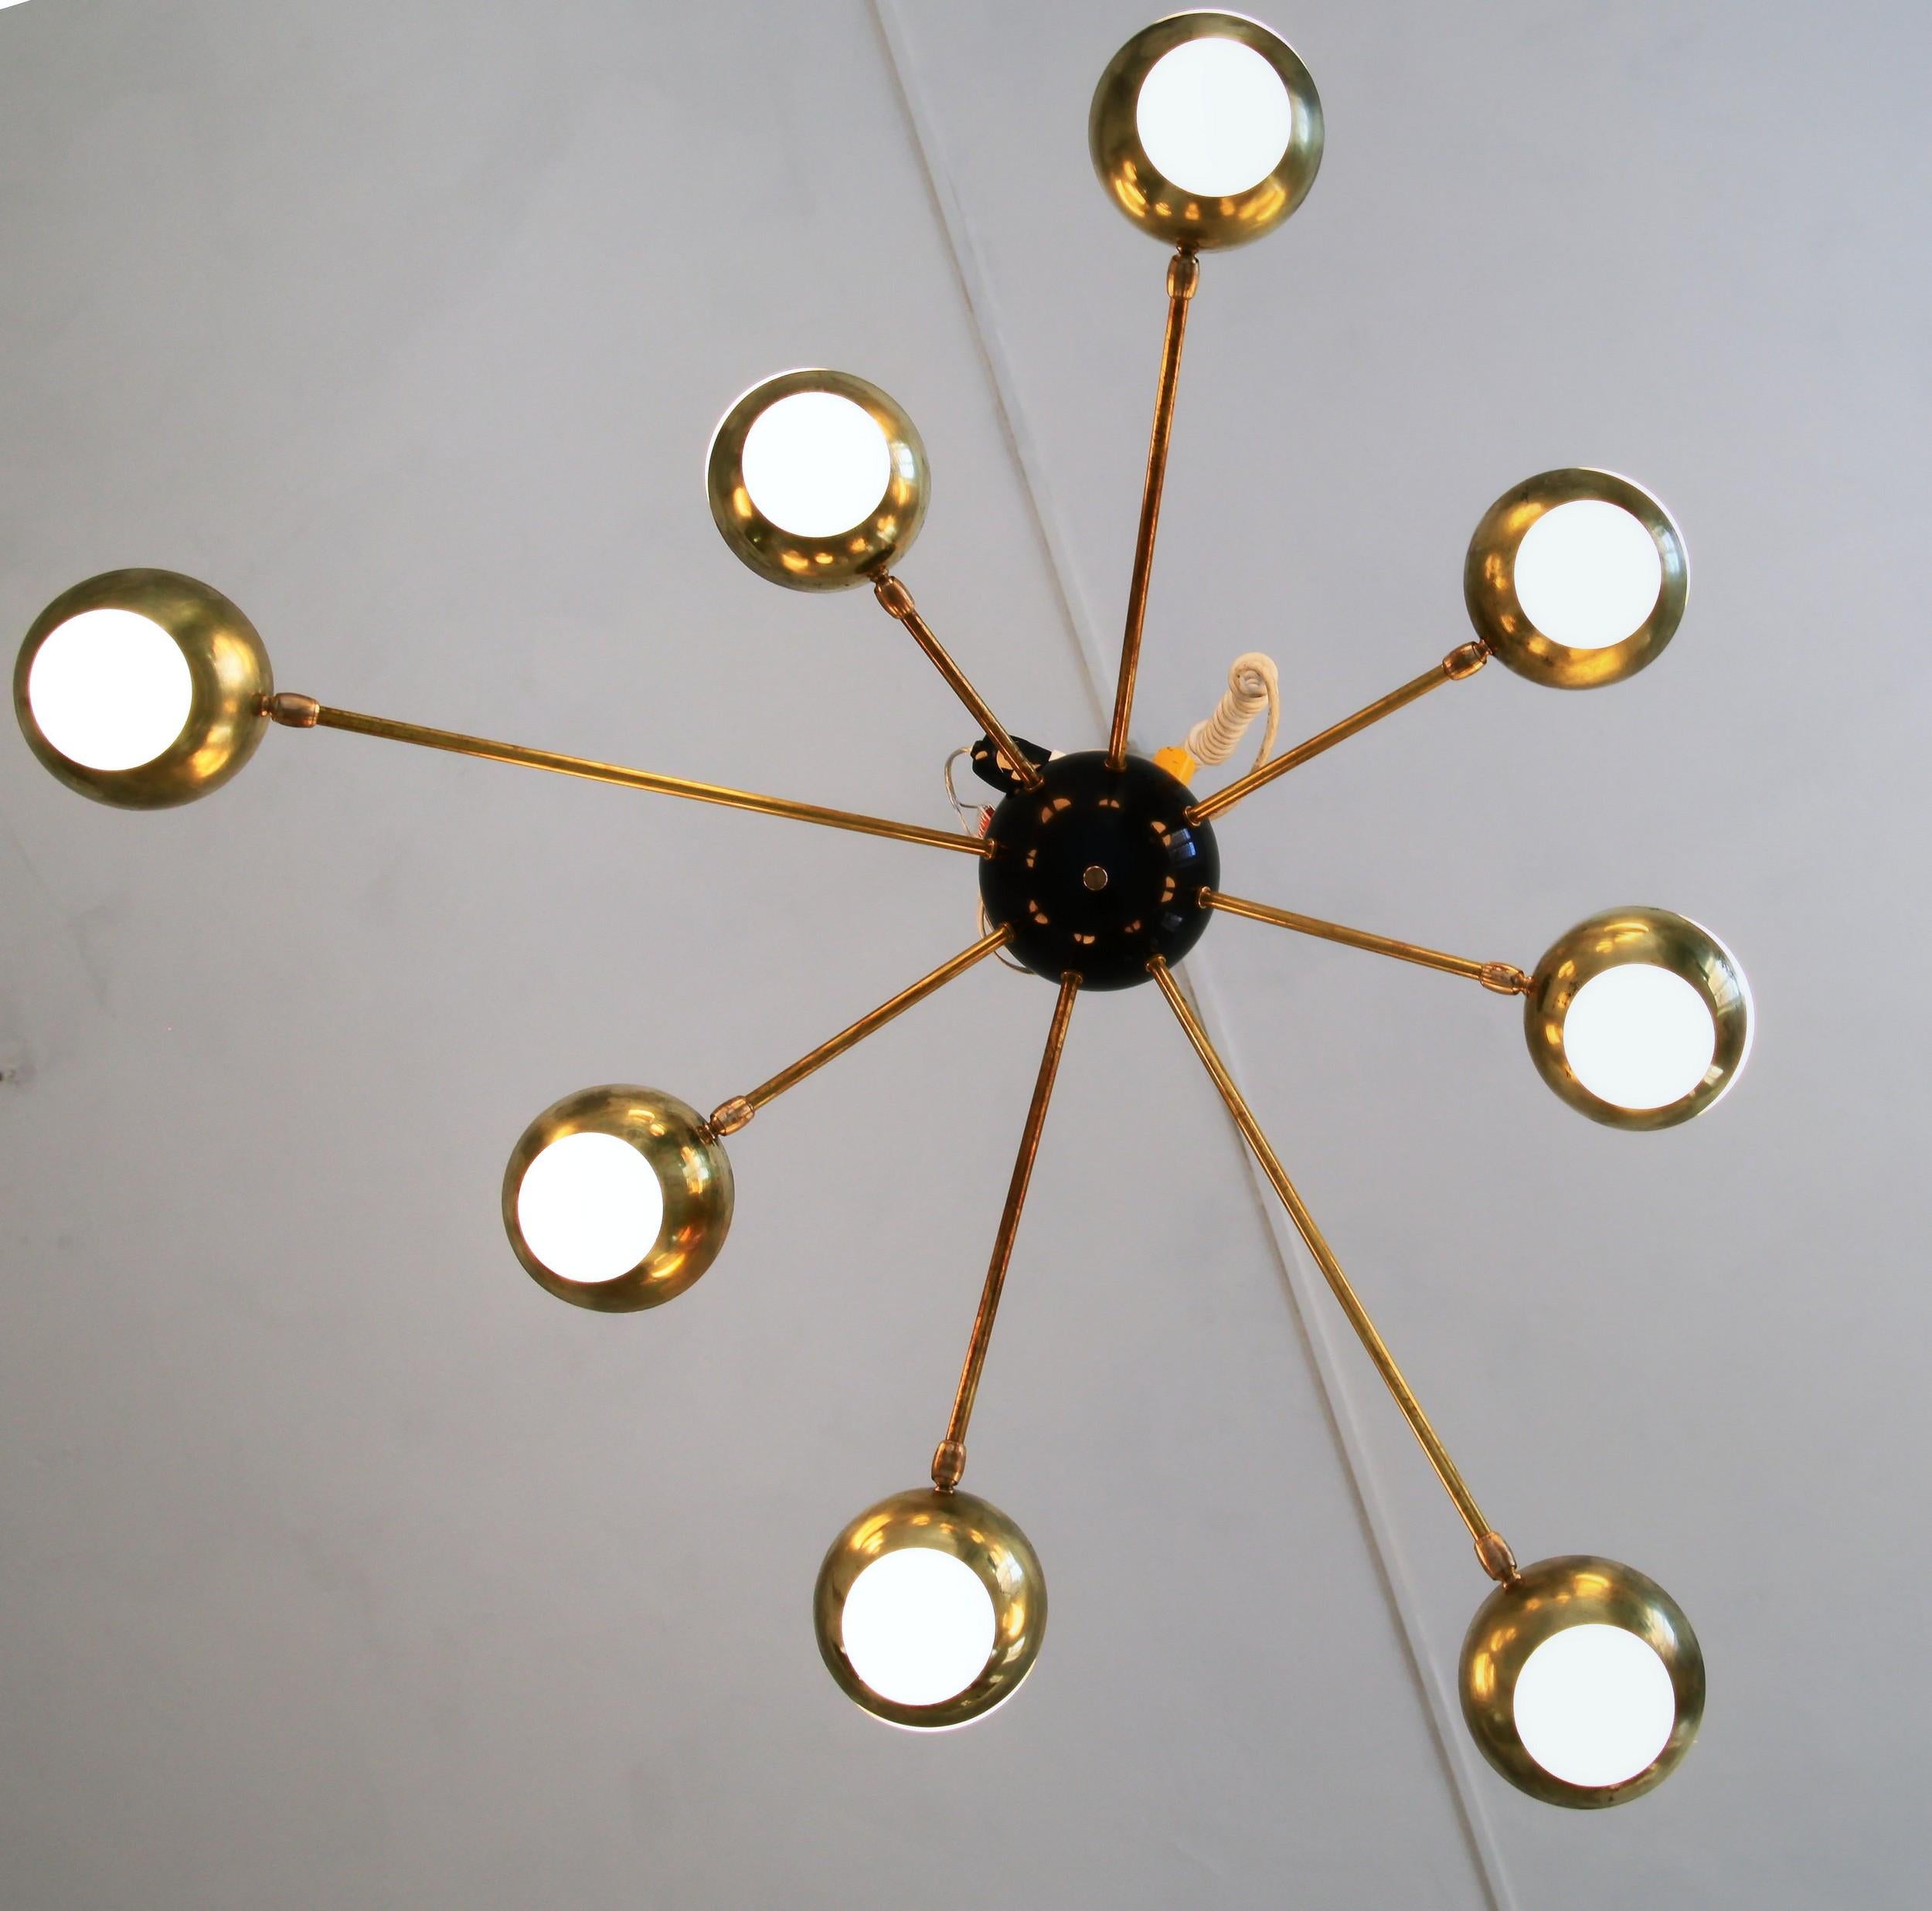 This chandelier is specifically designed for low ceilings, with a height of only 13 inches (32 cm). The arms and shade holders are made of brass, while the central part is made of metal to hold the leverage. The glass spheres have a diameter of